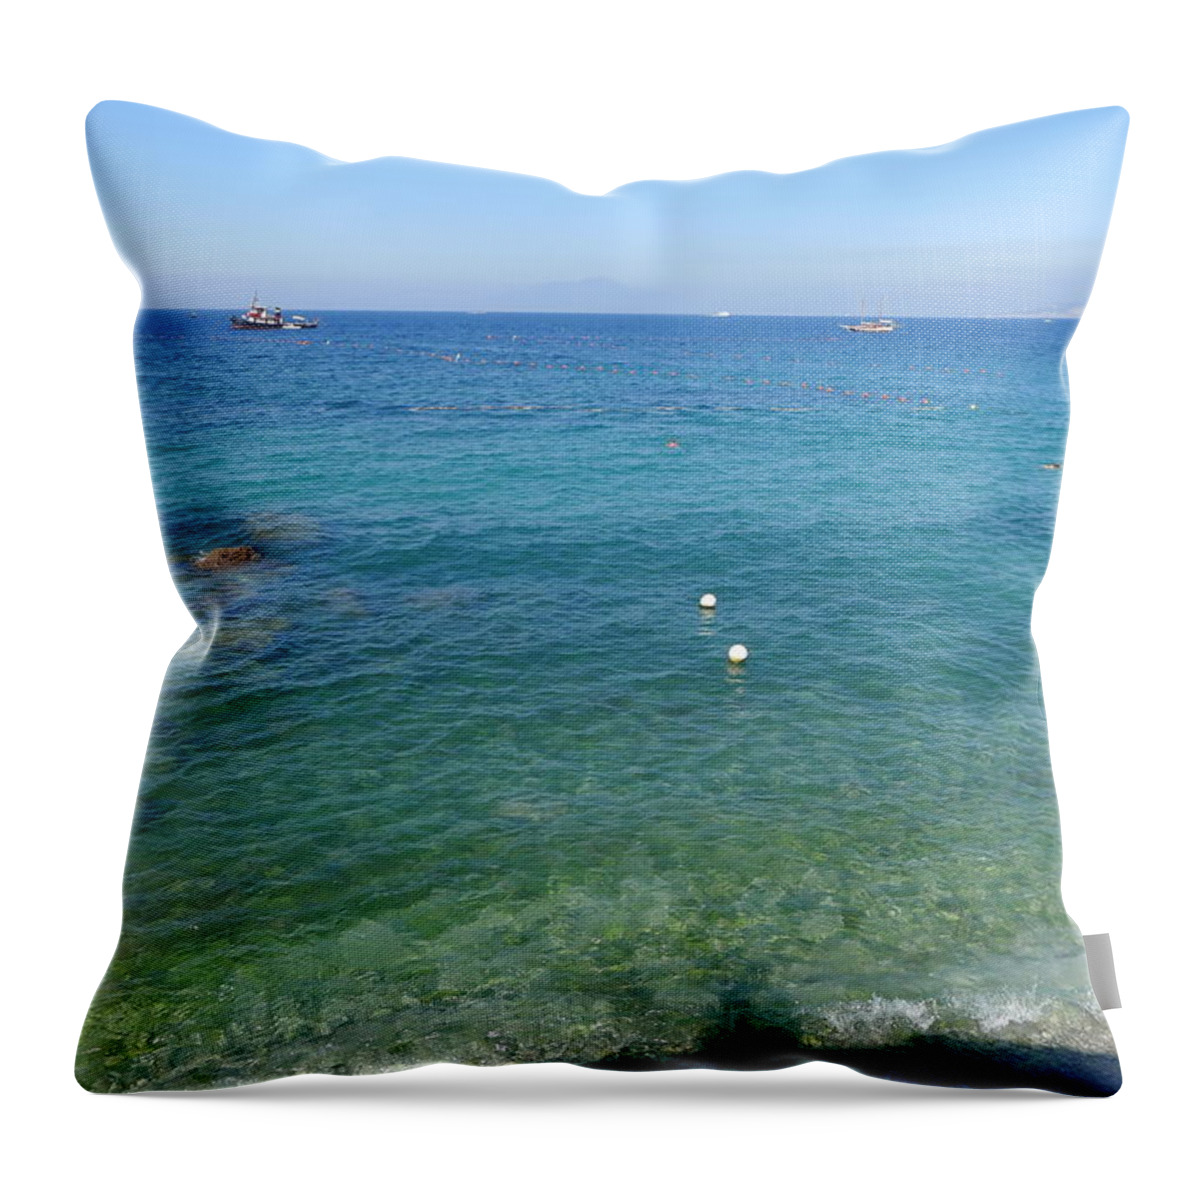  Throw Pillow featuring the photograph Beach - Capri by Nora Boghossian